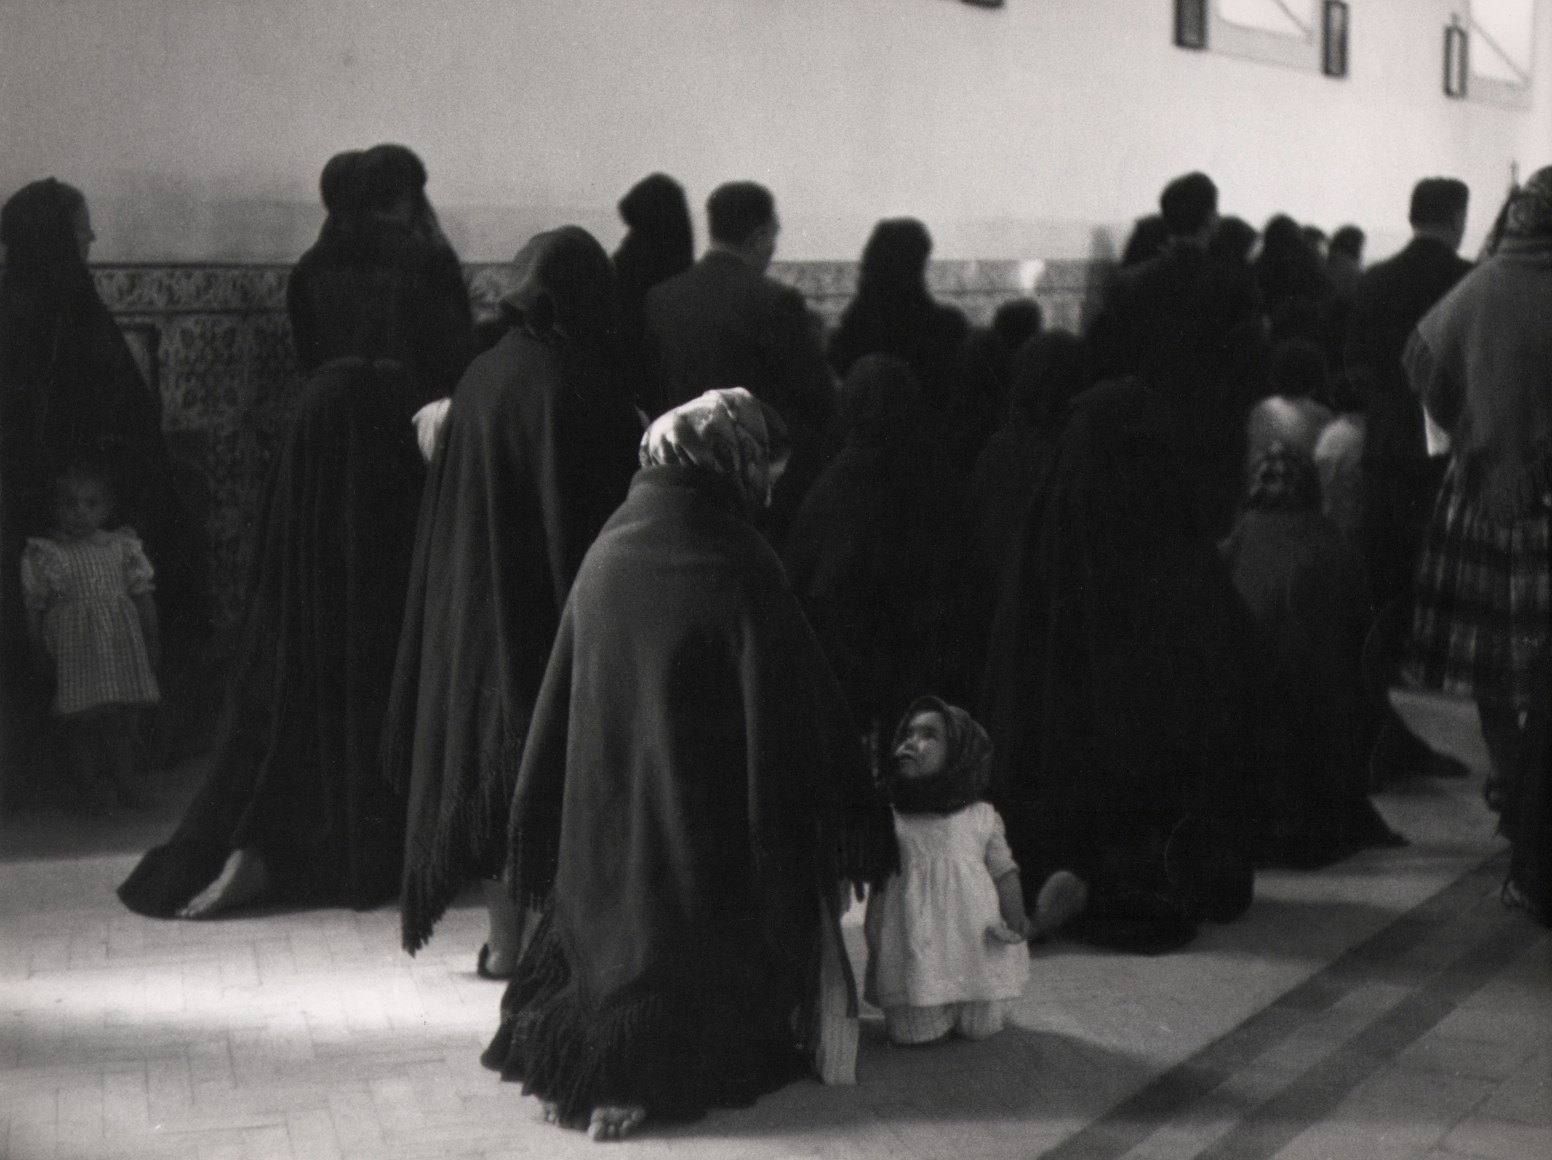 43. Sabine Weiss, La Messe, Portugal, 1954. A crowd of dark-cloaked figures in a hall; a young girl kneels with one cloaked woman in the center of the frame.